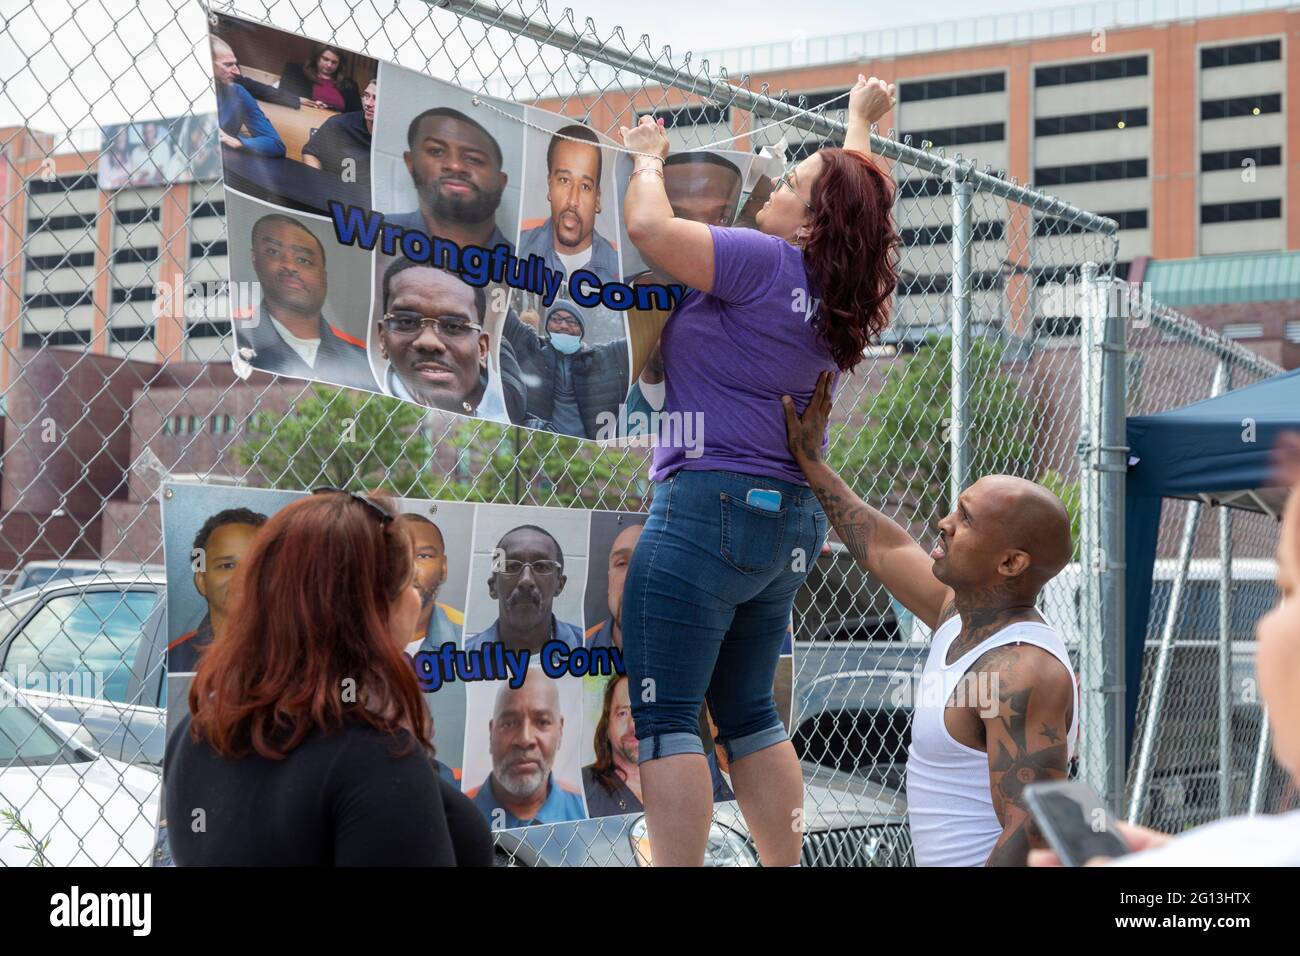 Detroit, Michigan, USA. 4th June, 2021. Family and friends of prisoners they say were wrongfully convicted rally outside the criminal courts building, the Frank Murphy Hall of Justice. Jennifer Gross, whose fiance Robert Vermett is in prison, puts up a banner before the rally. Credit: Jim West/Alamy Live News Stock Photo